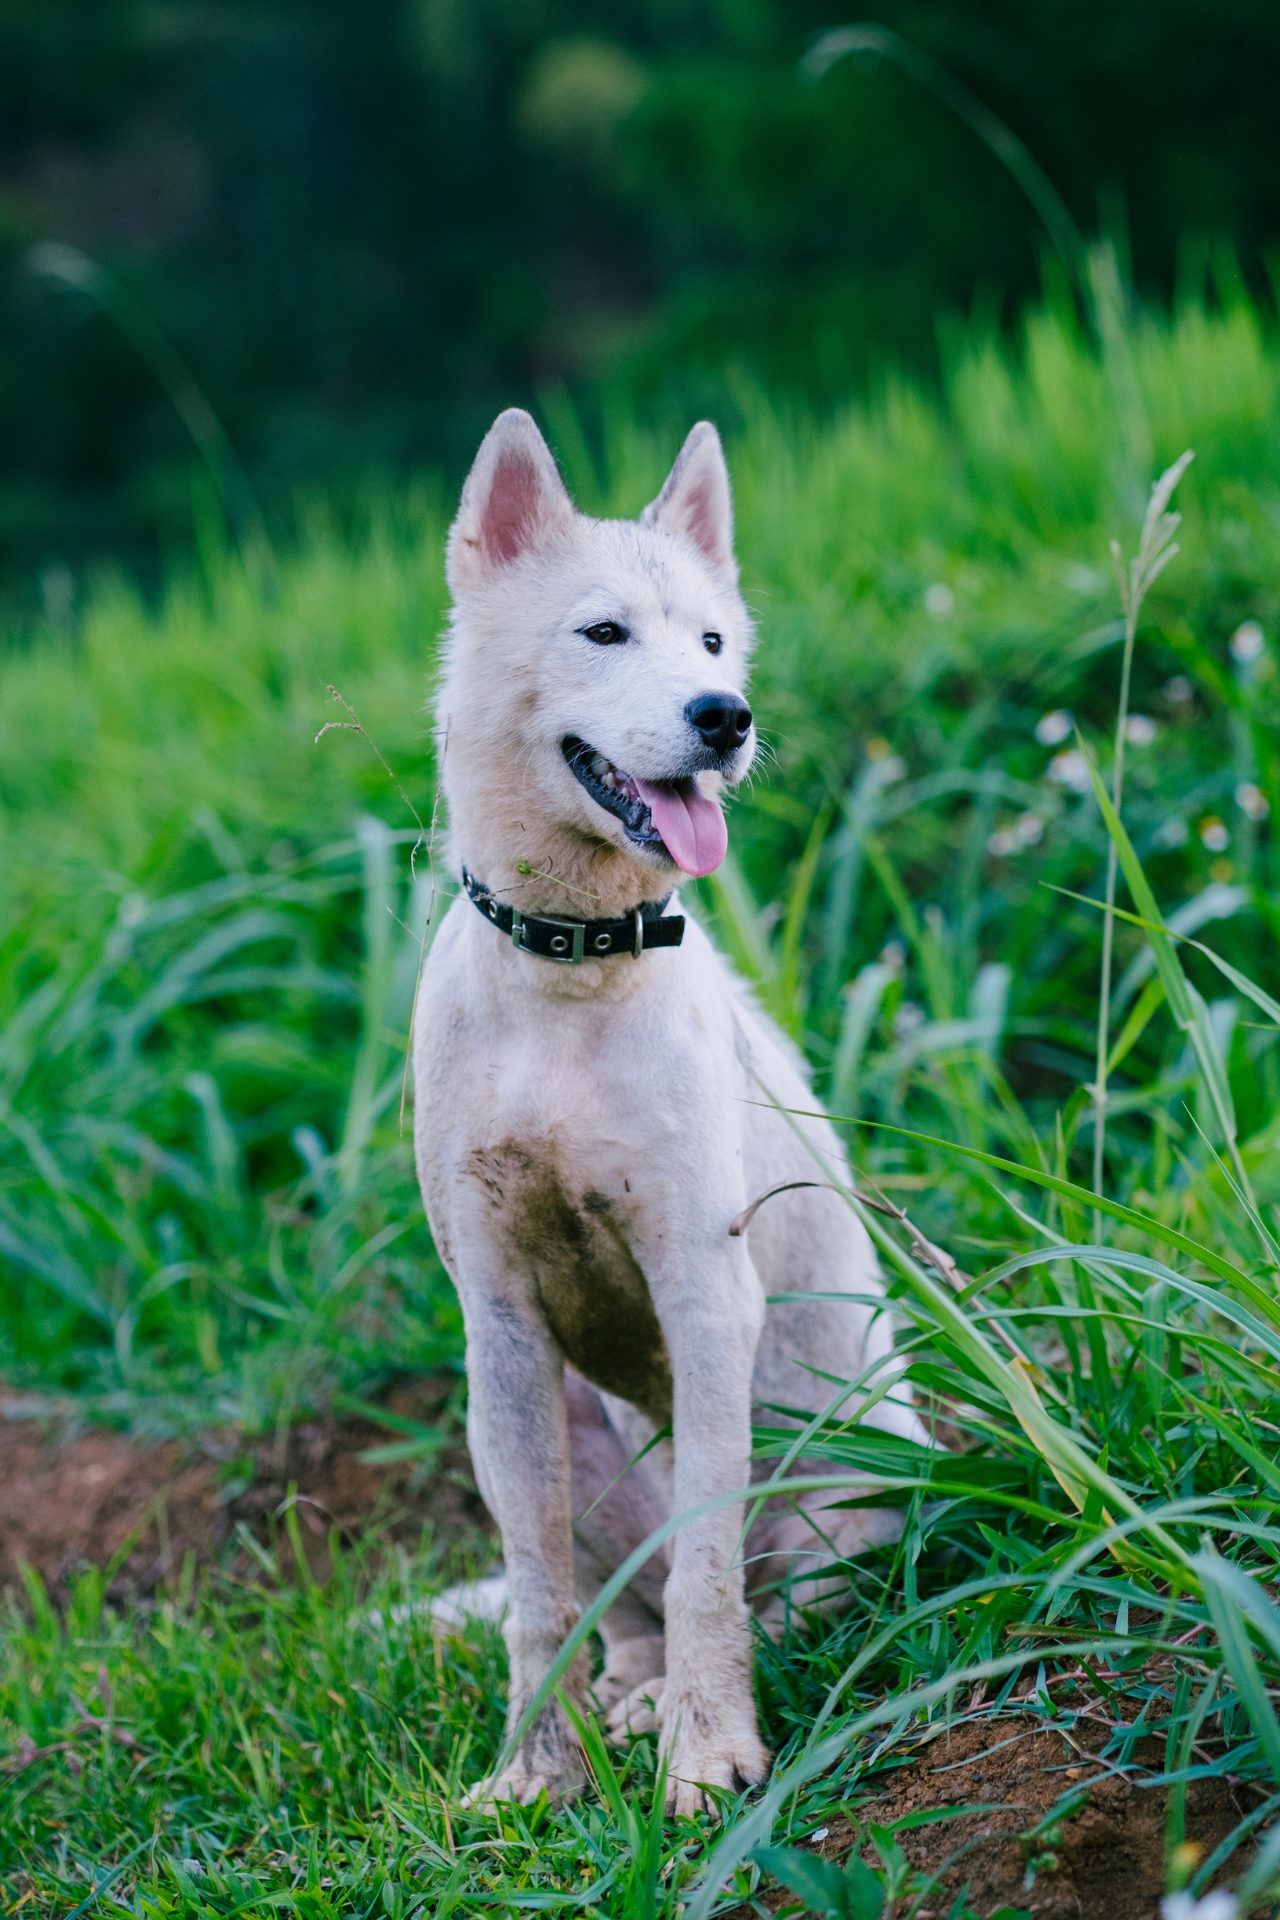 The image shows a white dog sitting in a field of tall green grass. The dog has a black nose and black eyes, and is wearing a collar.